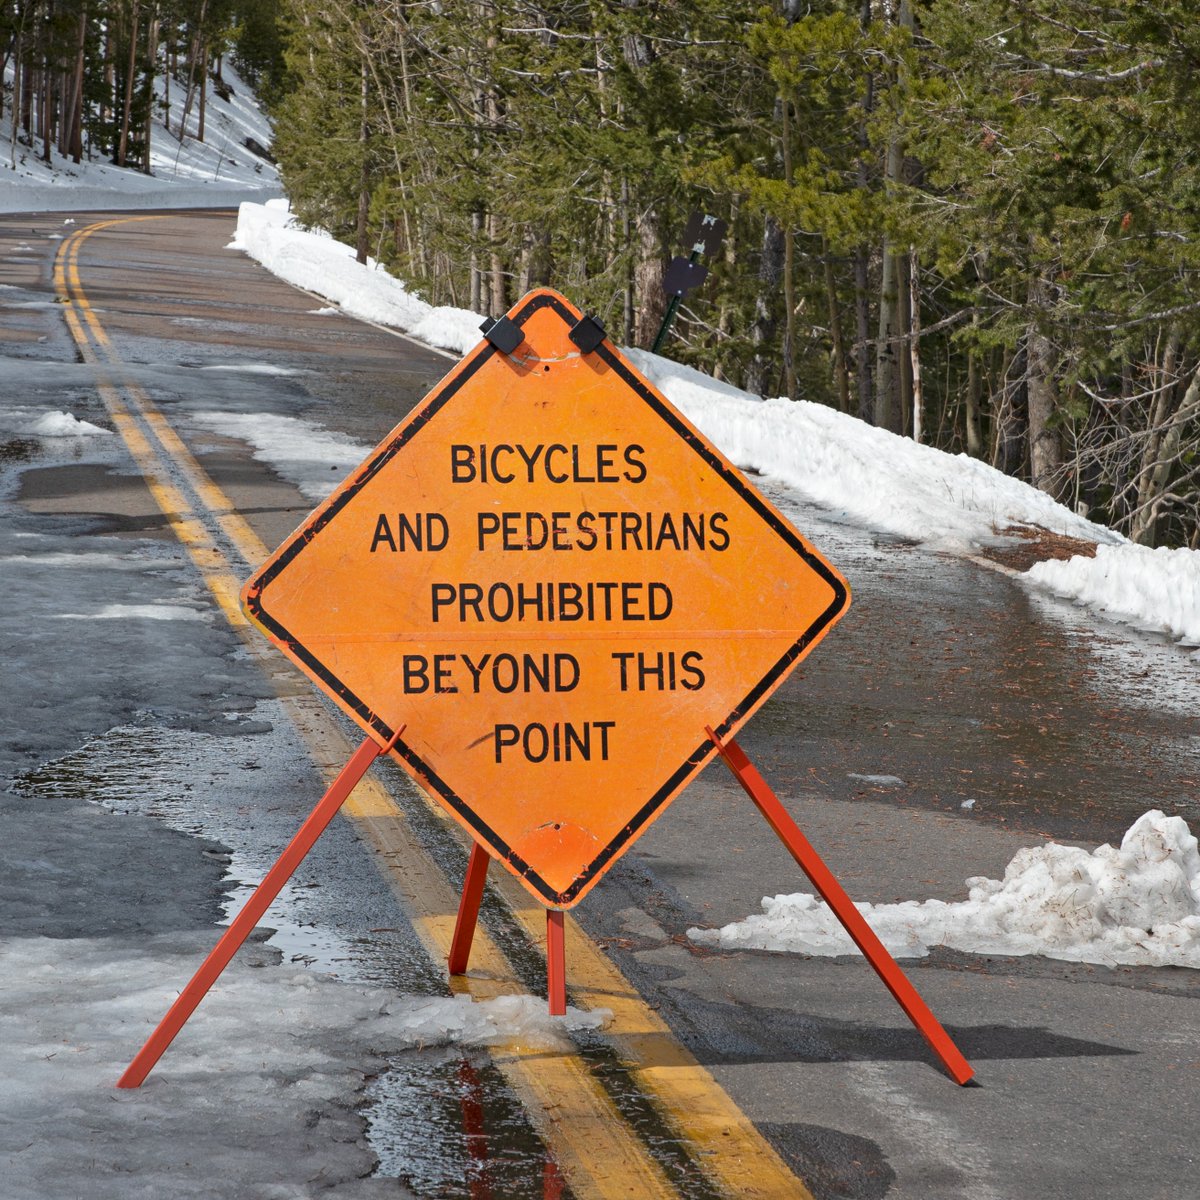 Spring opening operations have started in #RMNP and Rocky's Roads crews are busy plowing the east and west sides of Trail Ridge Road. Trail Ridge Road remains closed to vehicles at Many Parks Curve on the east side and at the Colorado River Trailhead on the west side of the park.